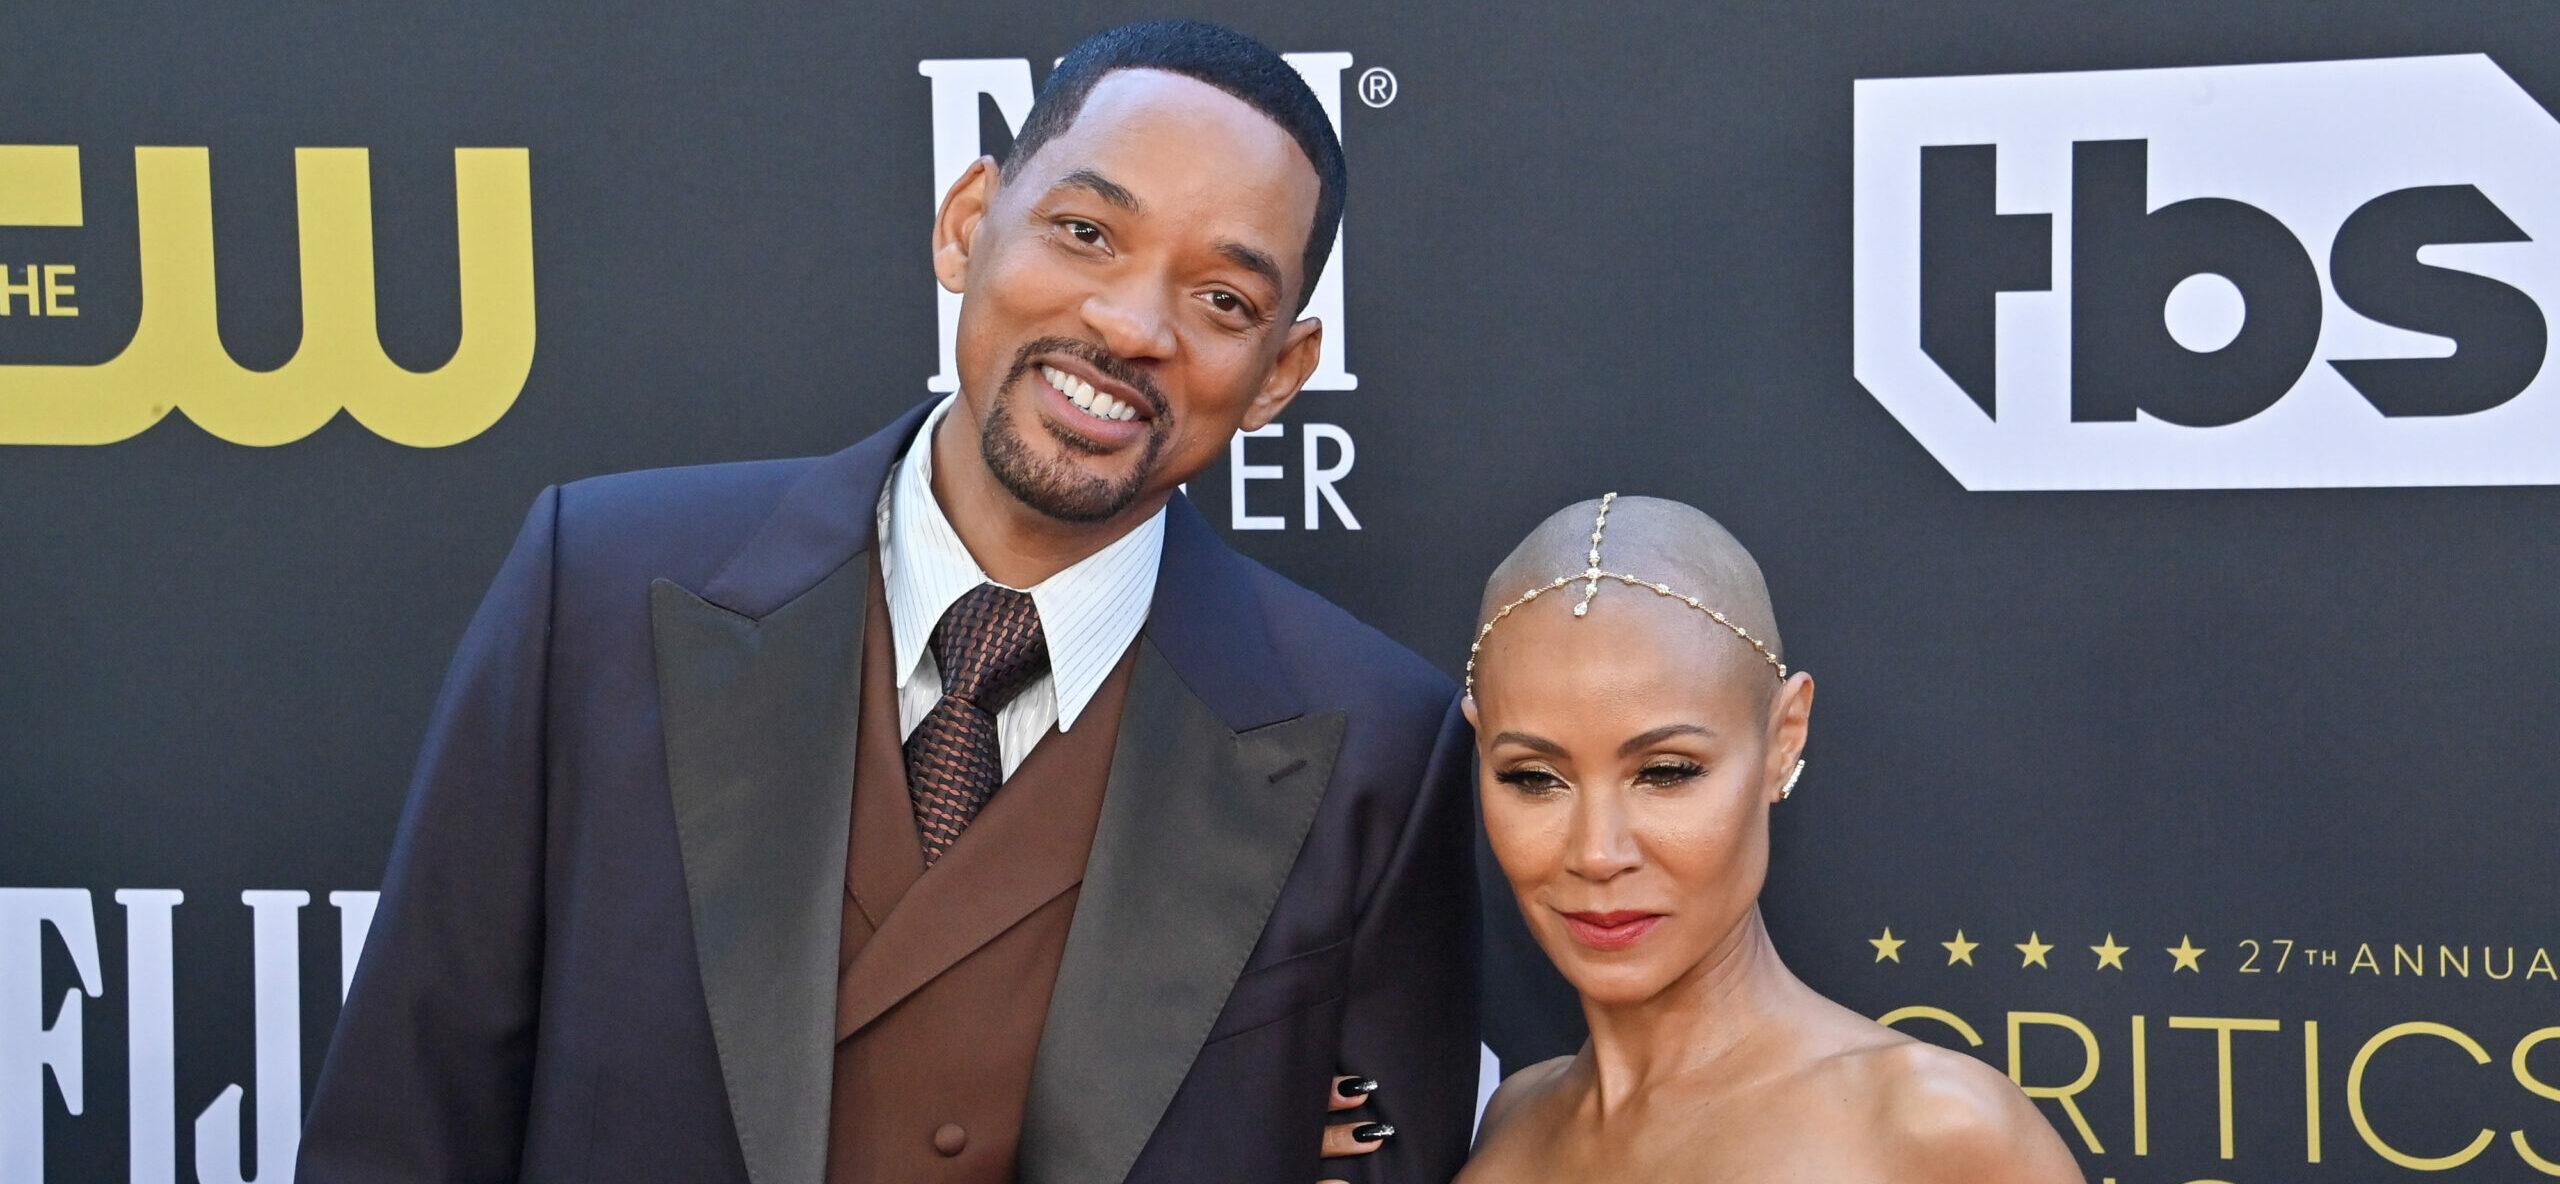 Jada Pinkett Smith Reveals Why She Doesn’t Call Will Smith Her ‘Husband’